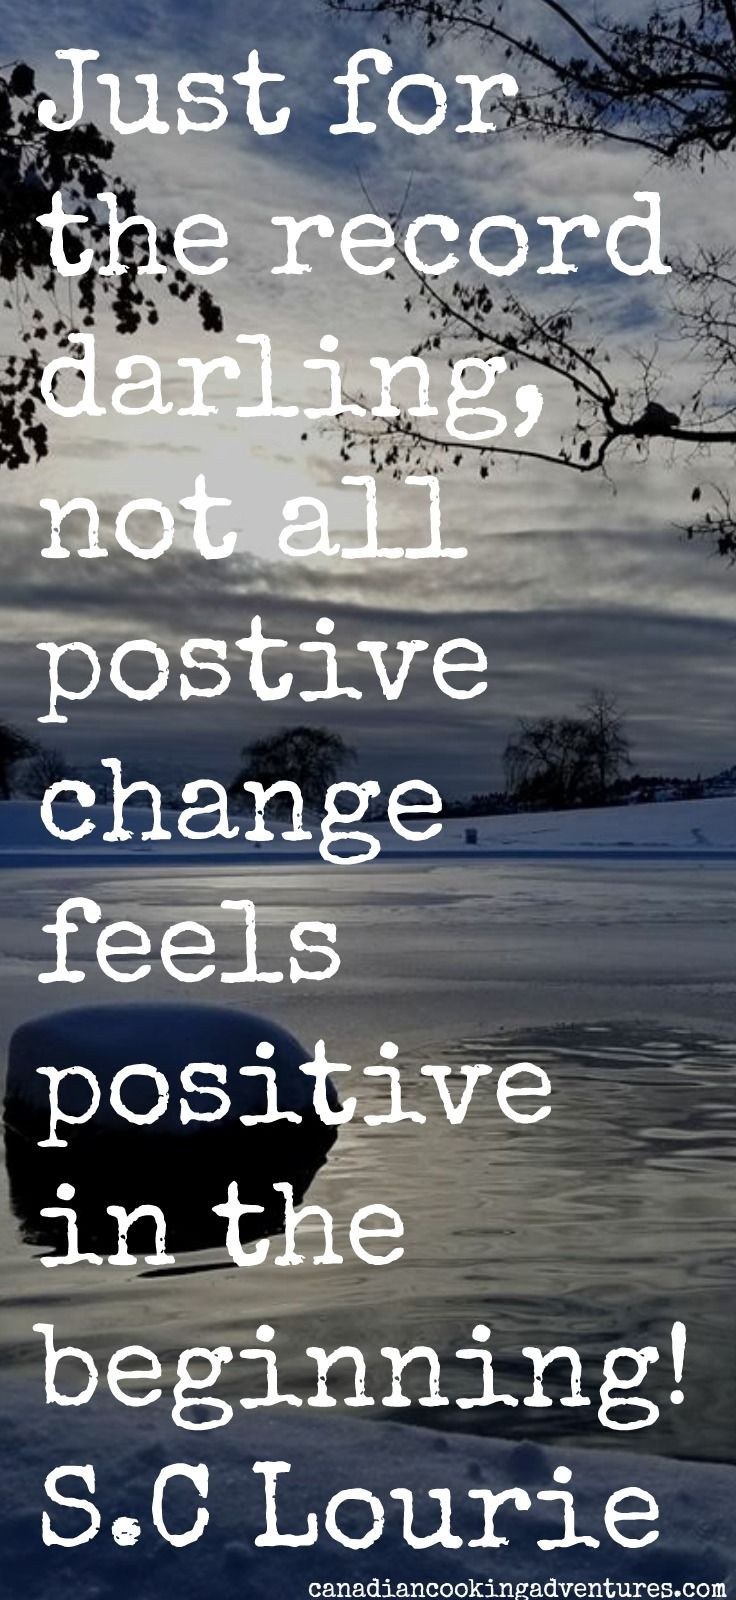 Positive Quotes For Change
 Best 25 Growth quotes ideas on Pinterest